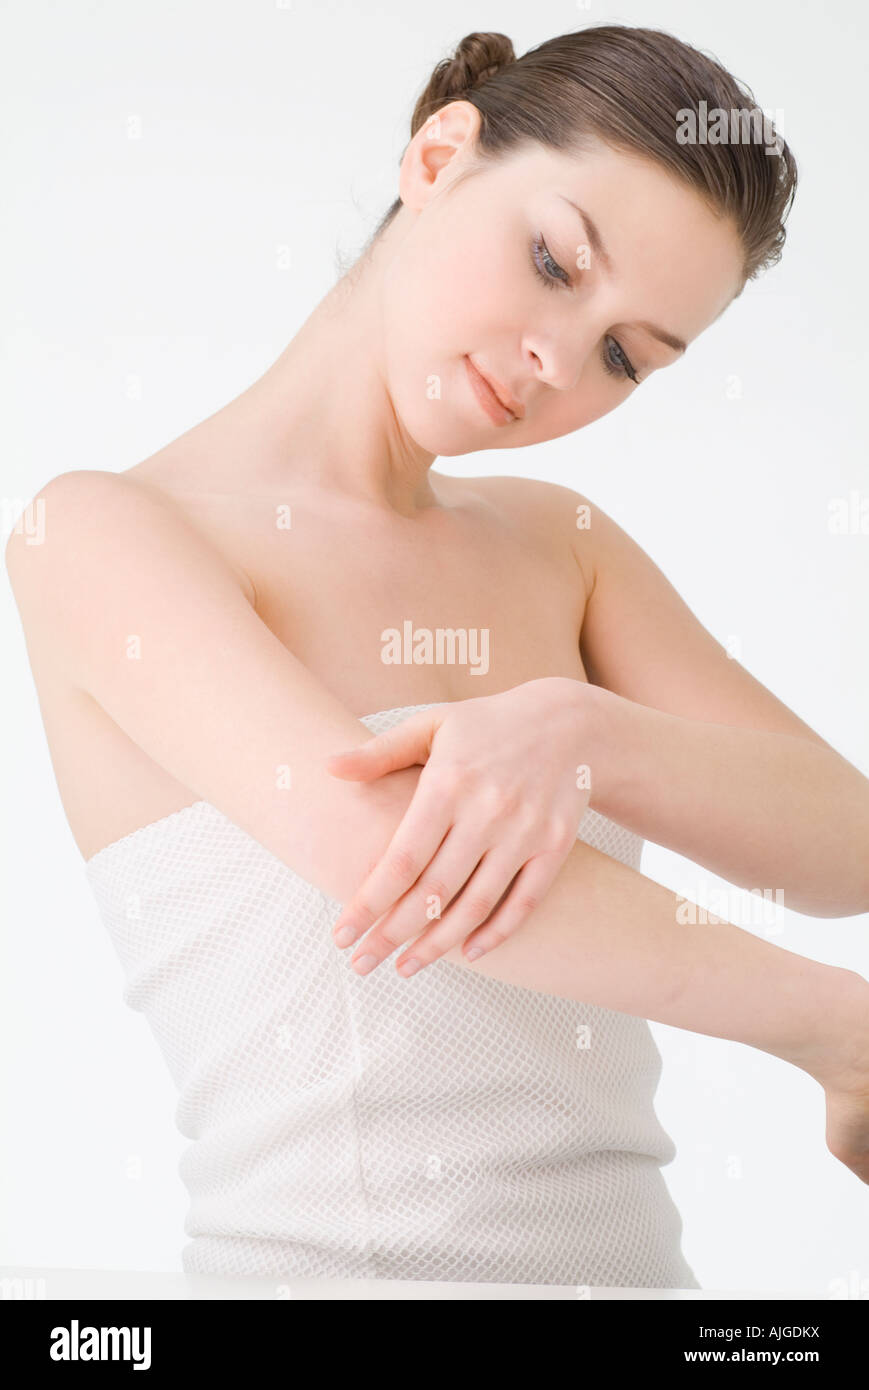 Young woman rubbing lotion on arm Stock Photo